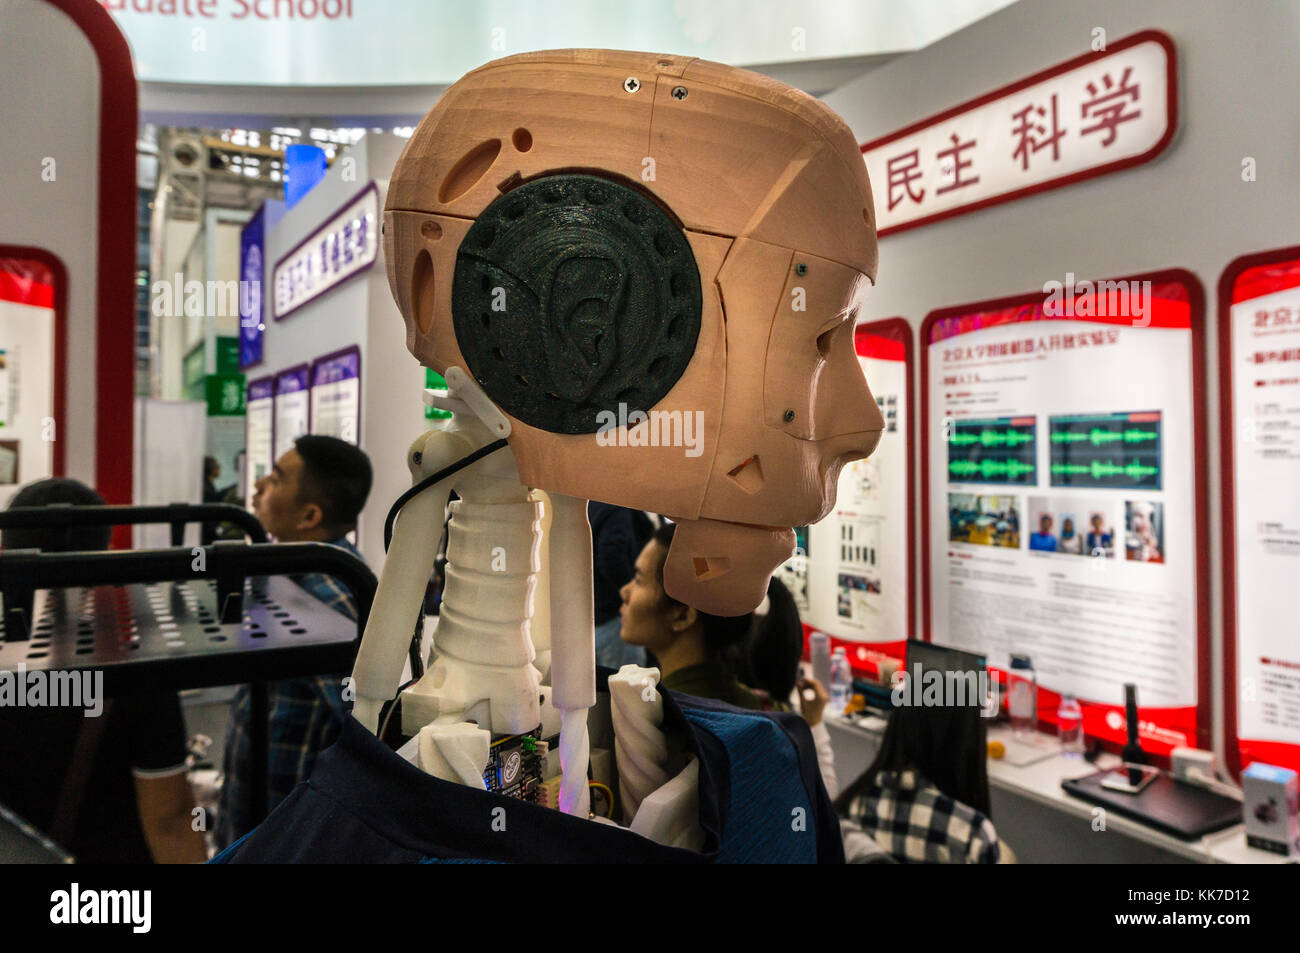 Humanoid robot prototype being developed at a Chinese university Stock Photo